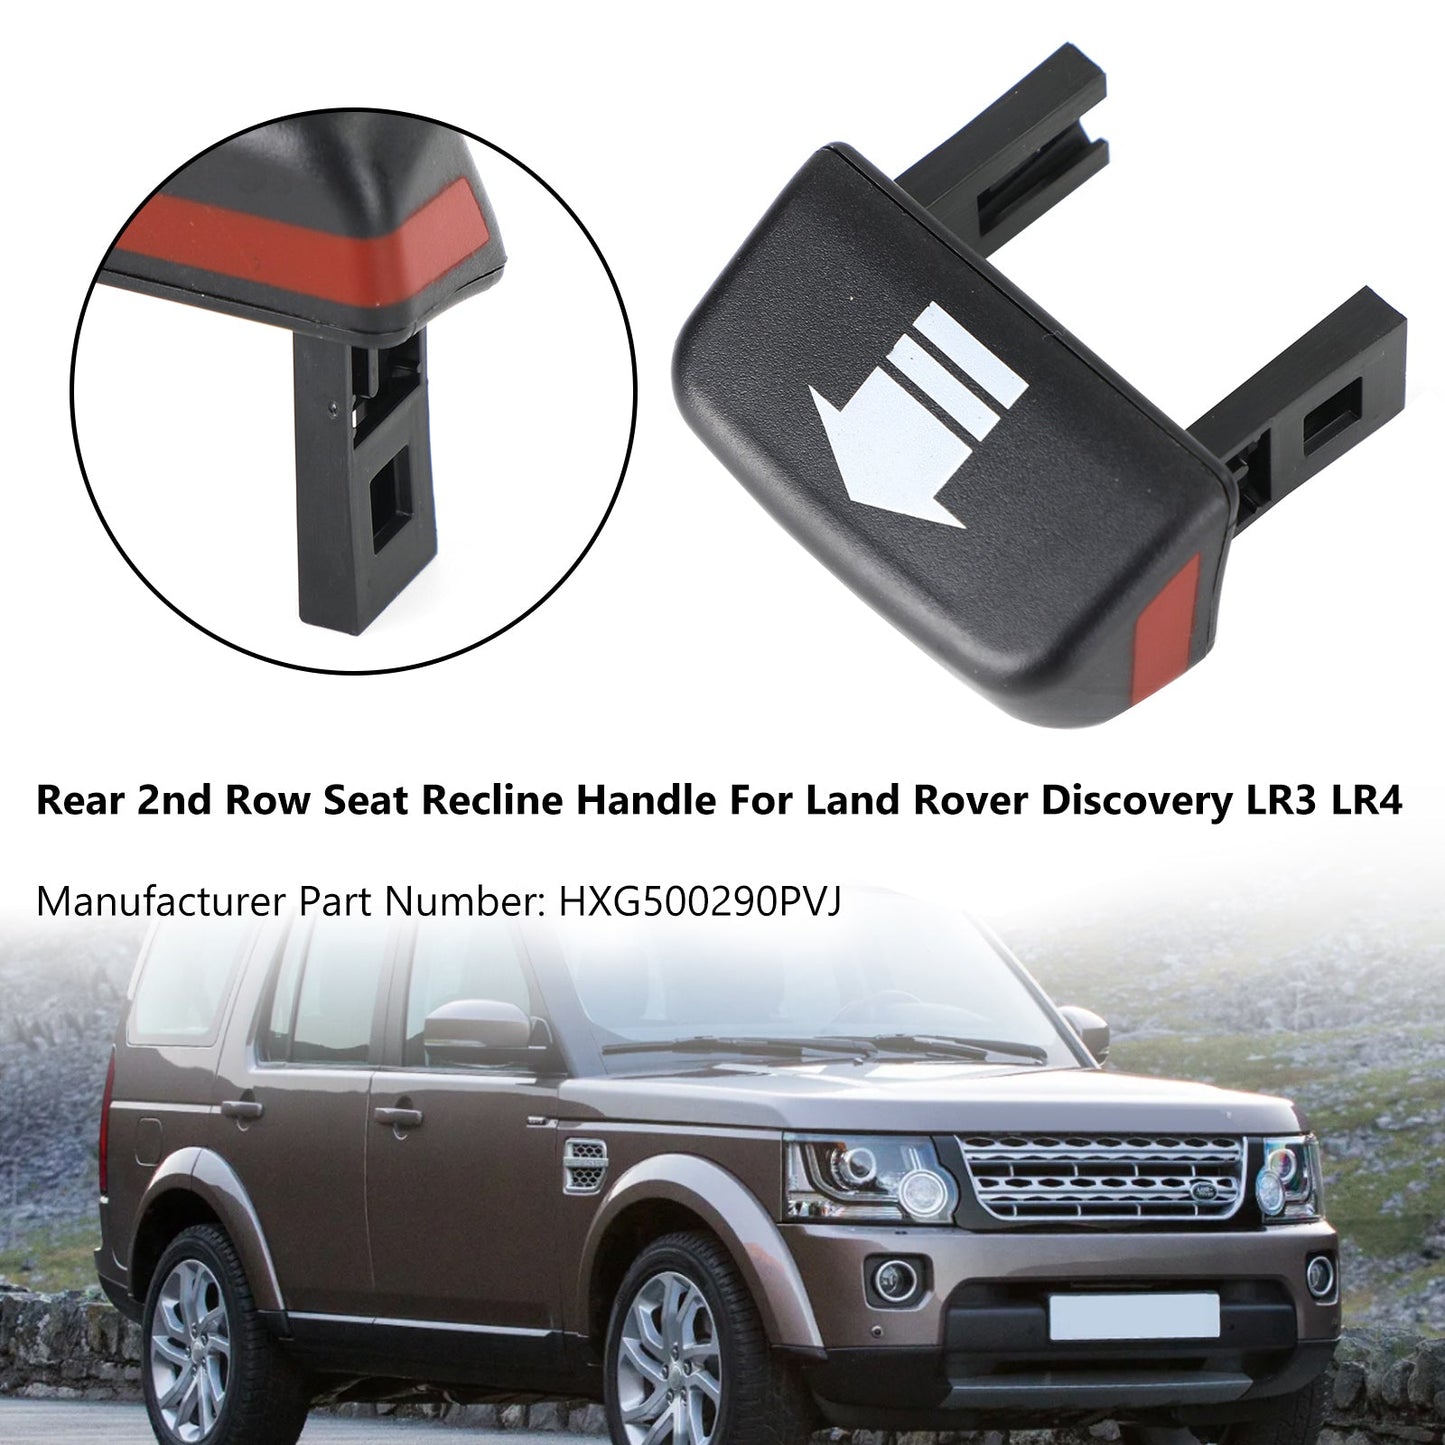 Rear 2nd Row Seat Recline Handle For Land Rover Discovery LR3 LR4 2004-2017